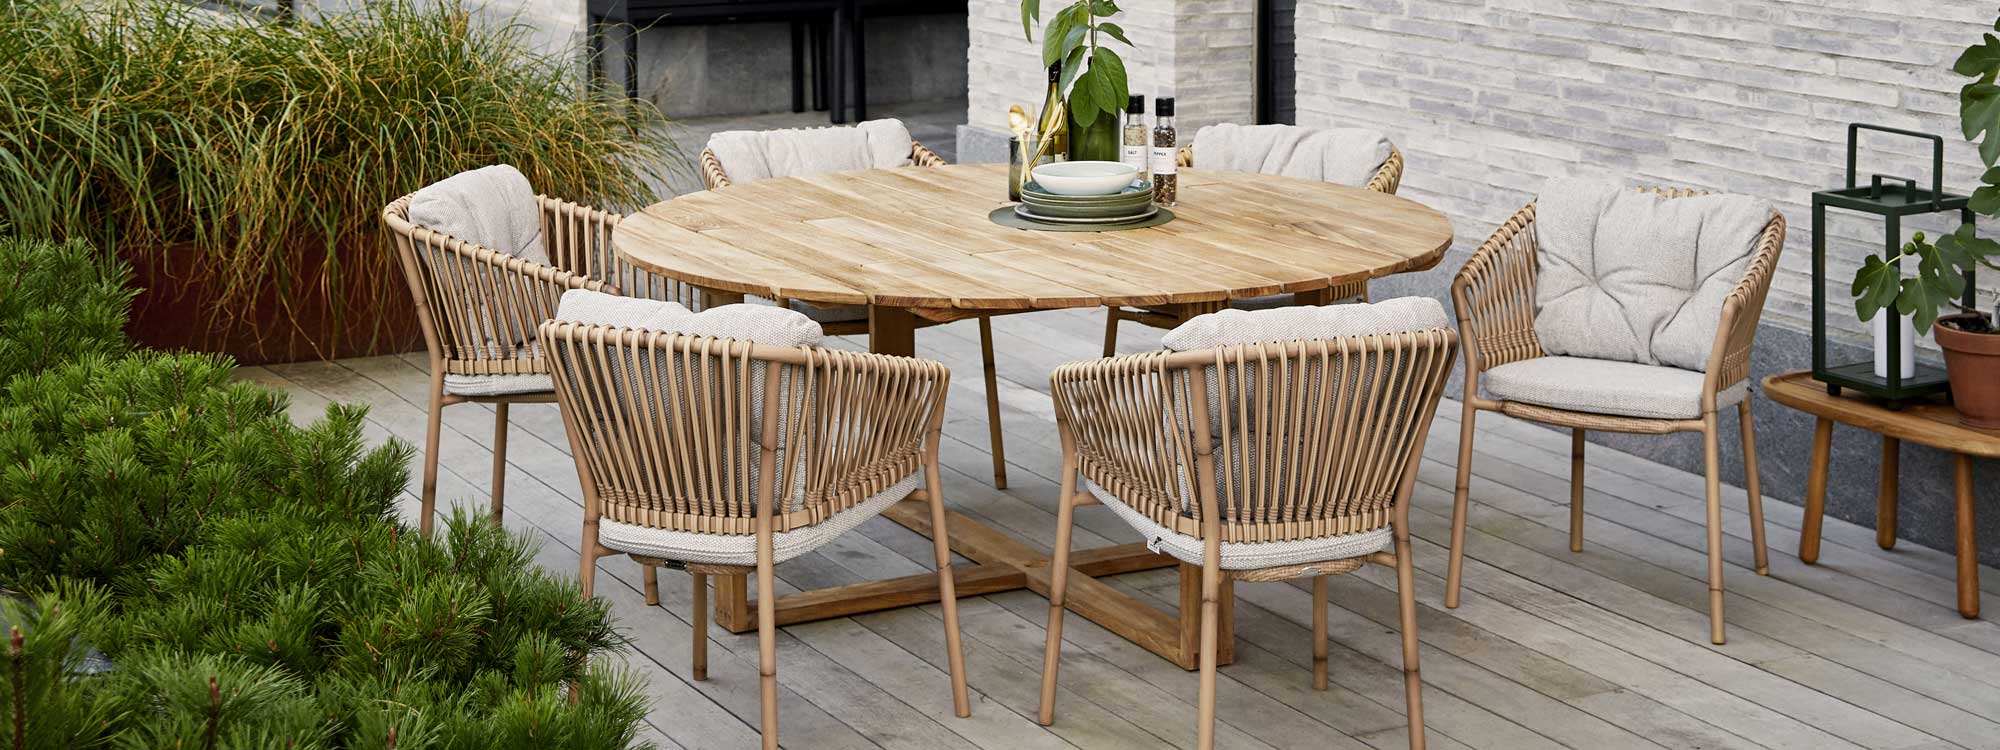 Image of Cane-line Endless round teak table and Ocean bamboo effect chairs, shown on decking surrounded by plants